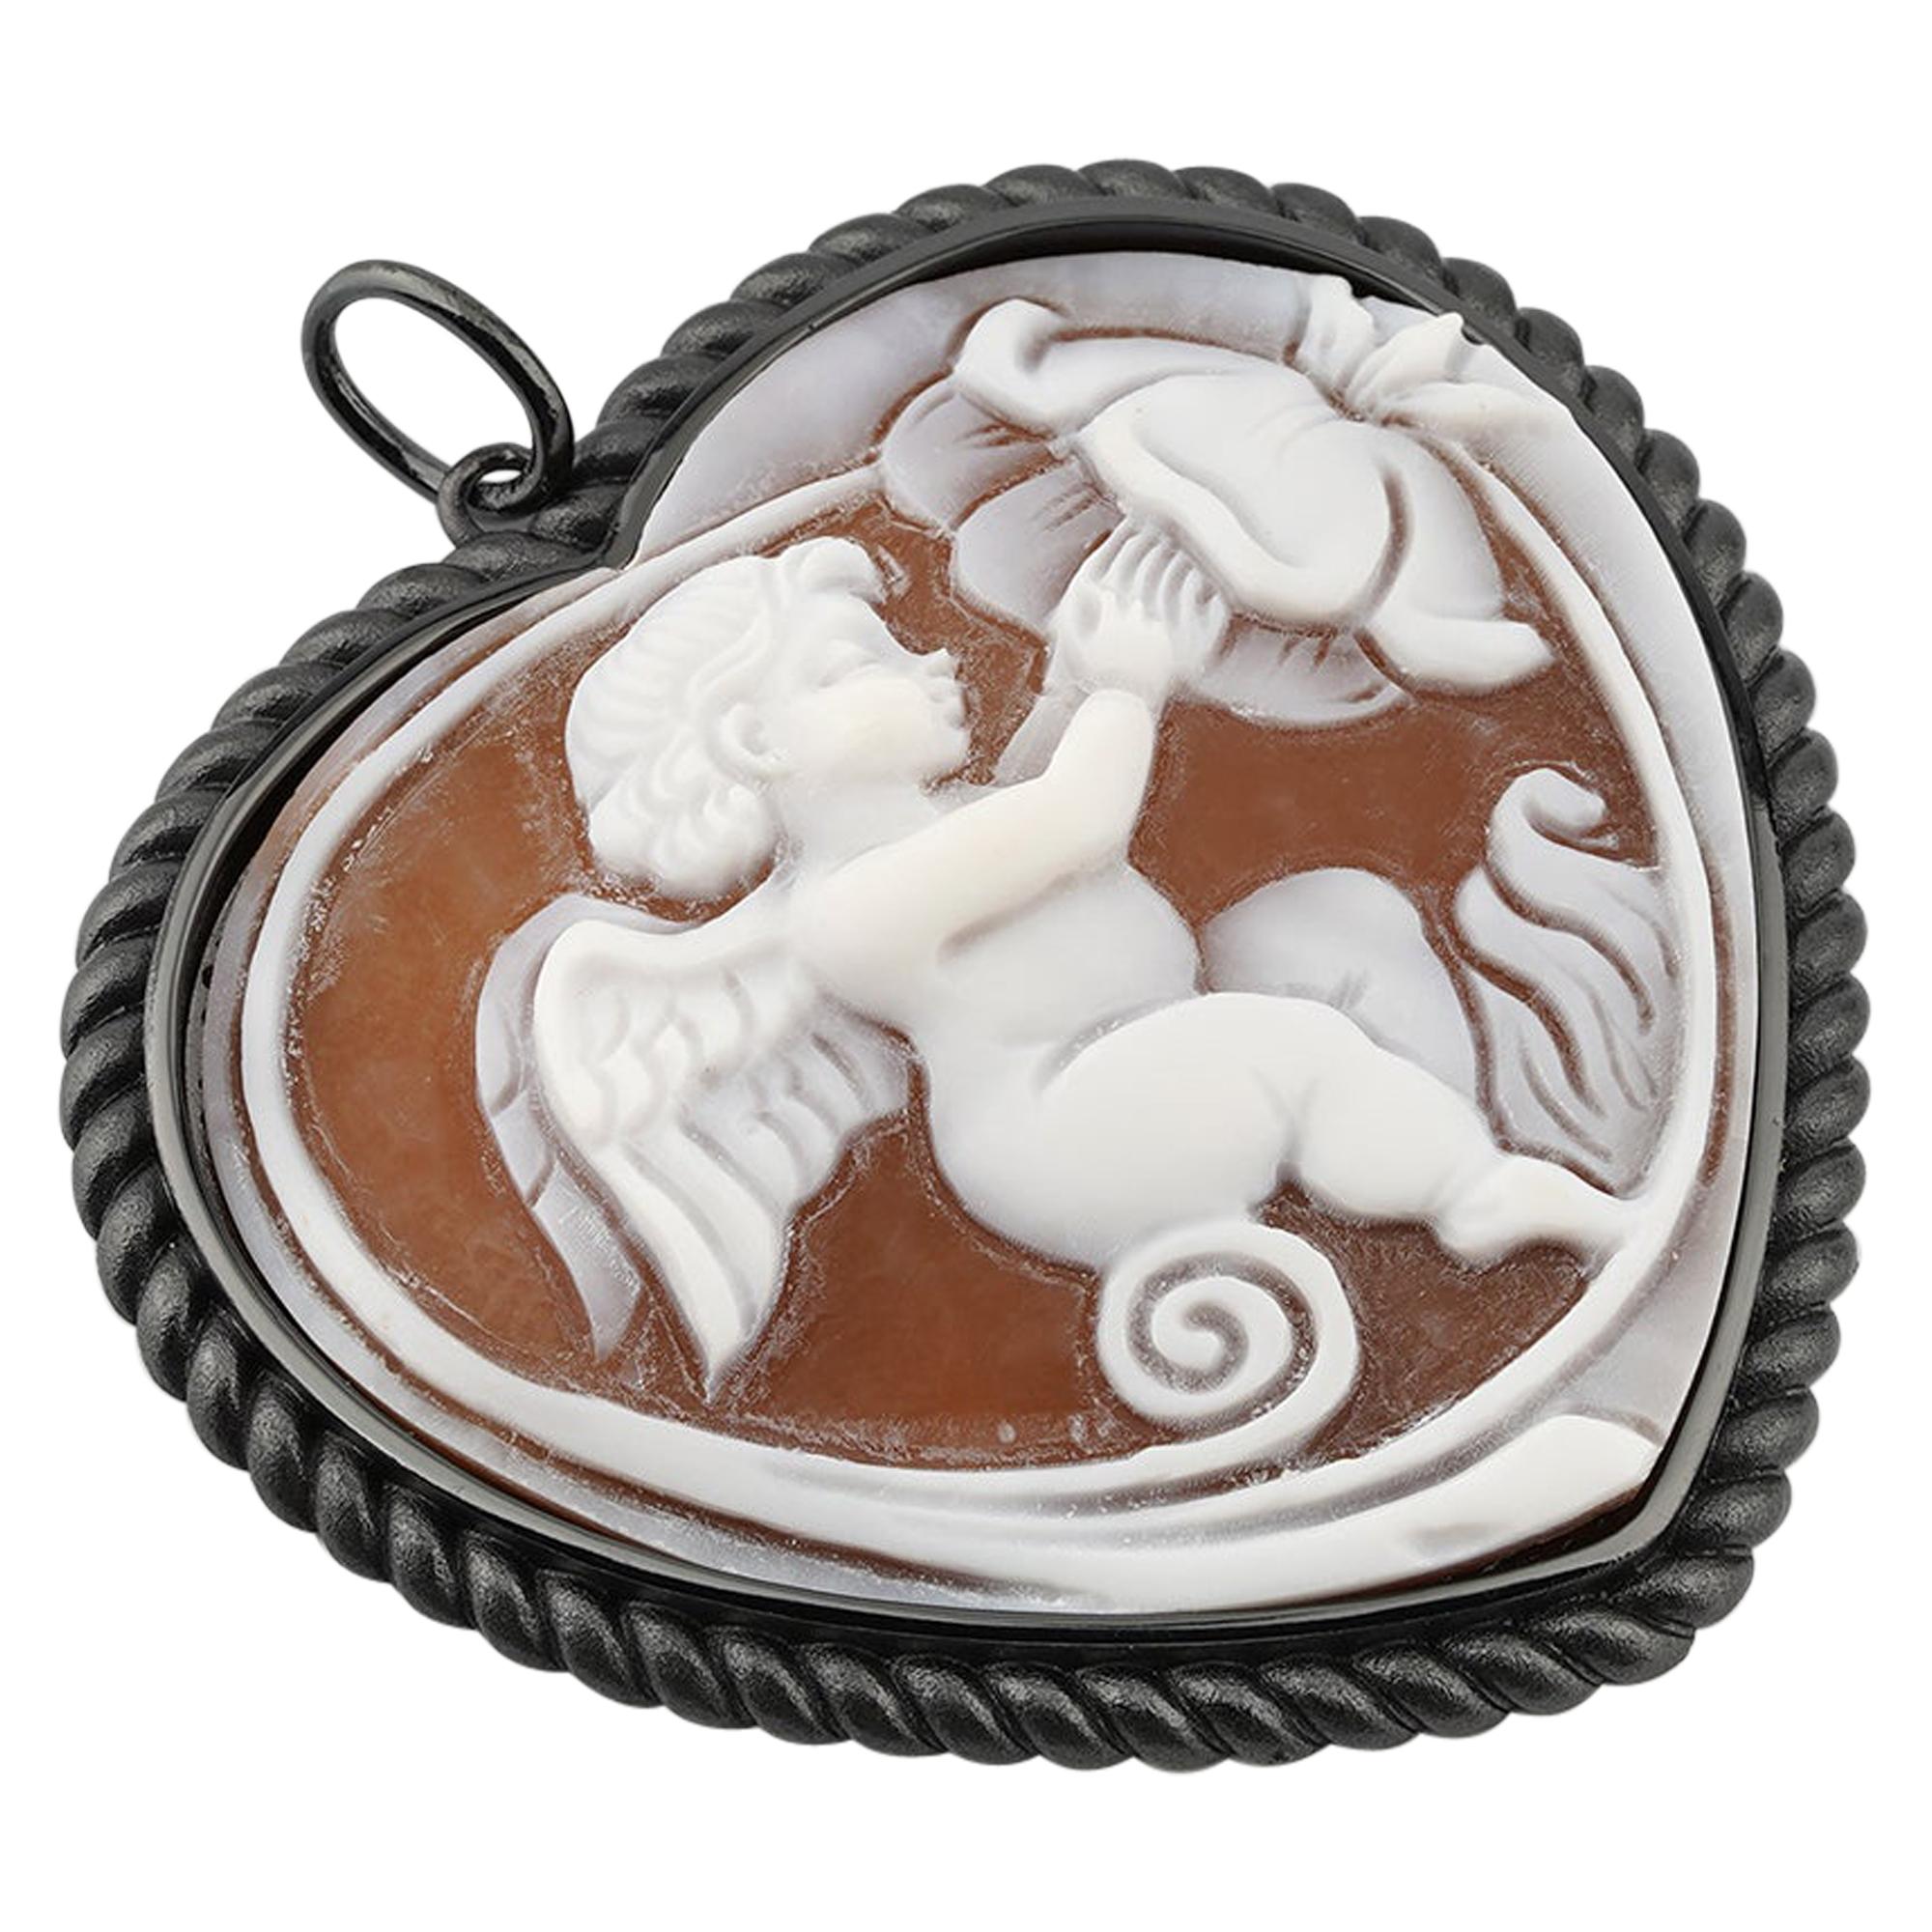 Cameo Italiano. The Cupid hand-carved on Sea shell cameo, heart pendant. For Sale